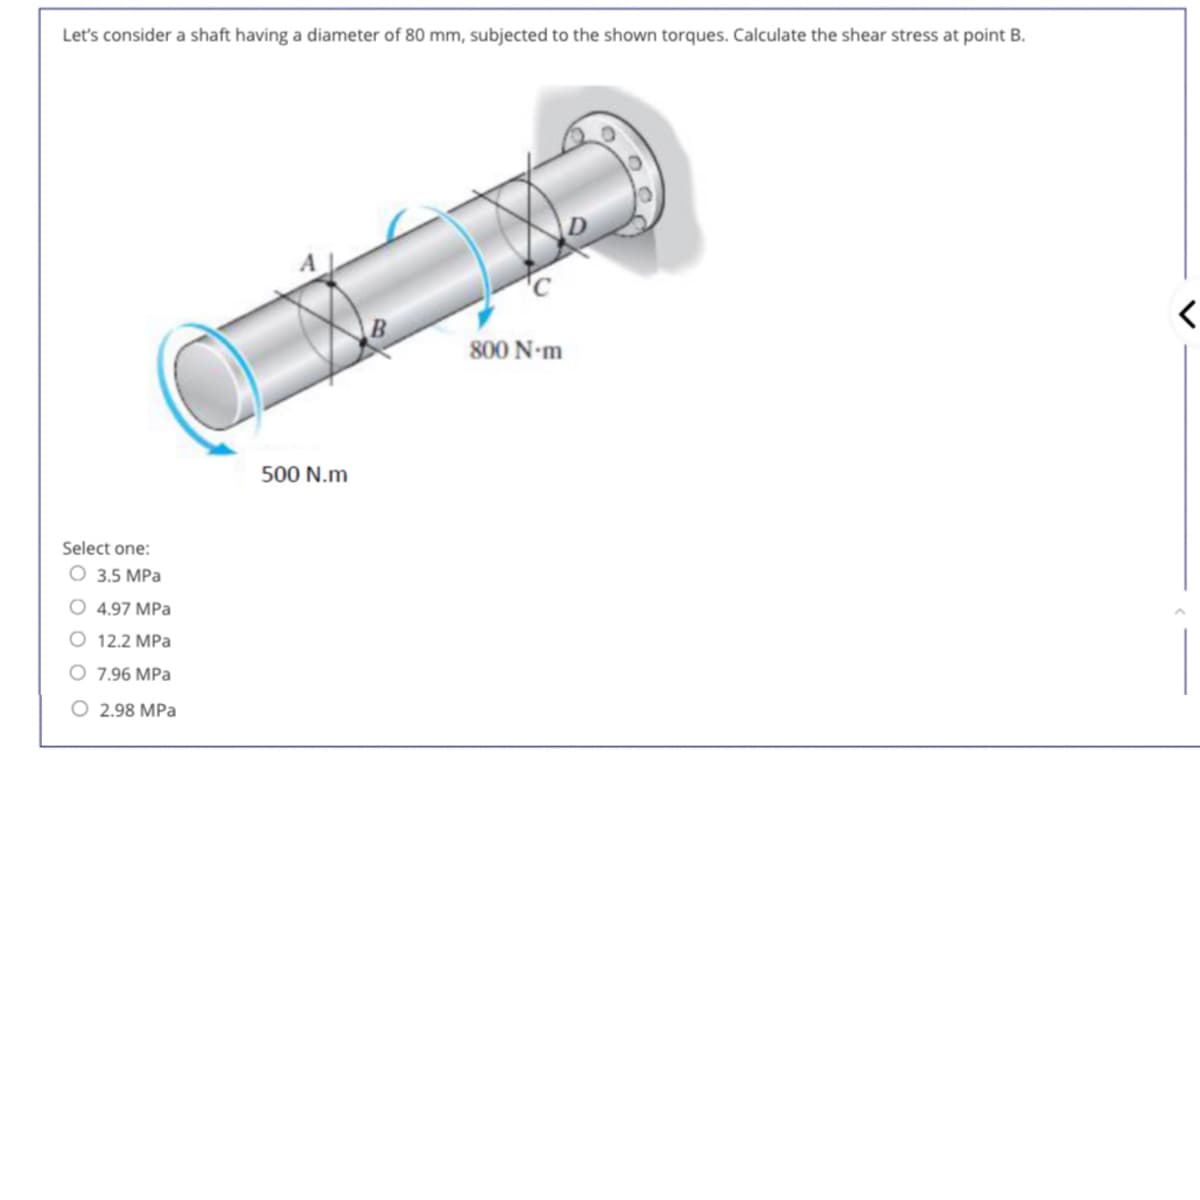 Let's consider a shaft having a diameter of 80 mm, subjected to the shown torques. Calculate the shear stress at point B.
Select one:
O 3.5 MPa
O 4.97 MPa
O 12.2 MPa
O 7.96 MPa
2.98 MPa
500 N.m
800 N-m
<